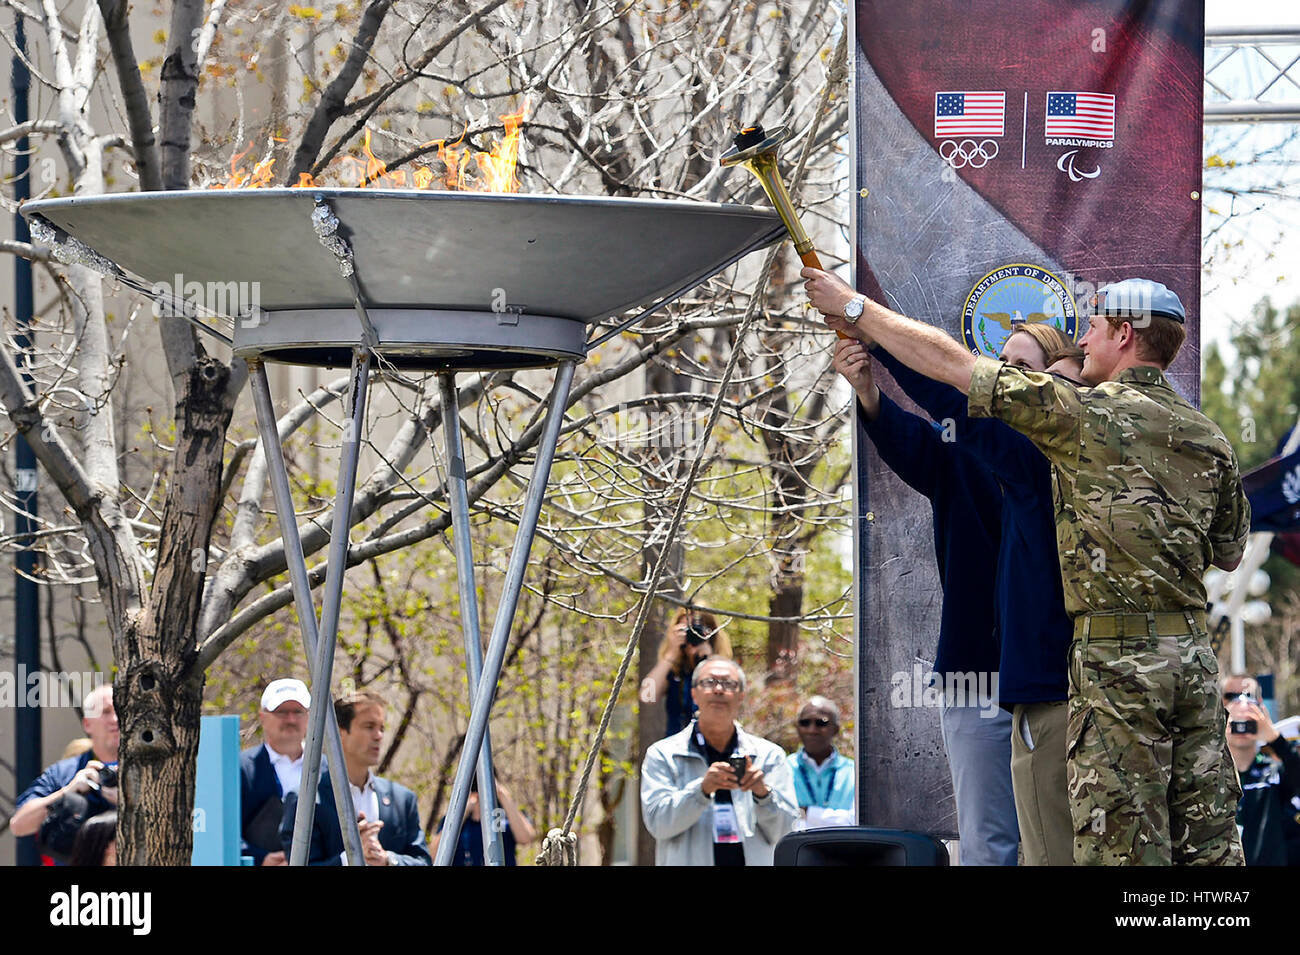 Paralympian gold medal winner Navy Lieutenant Bradley Snyder, with the help of Prince Harry and olympian Missy Franklin, light the official torch to begin the 2013 Warrior Games at the U.S Olympic Training Center in Colorado Springs, Colorado, May 11, 201 Stock Photo